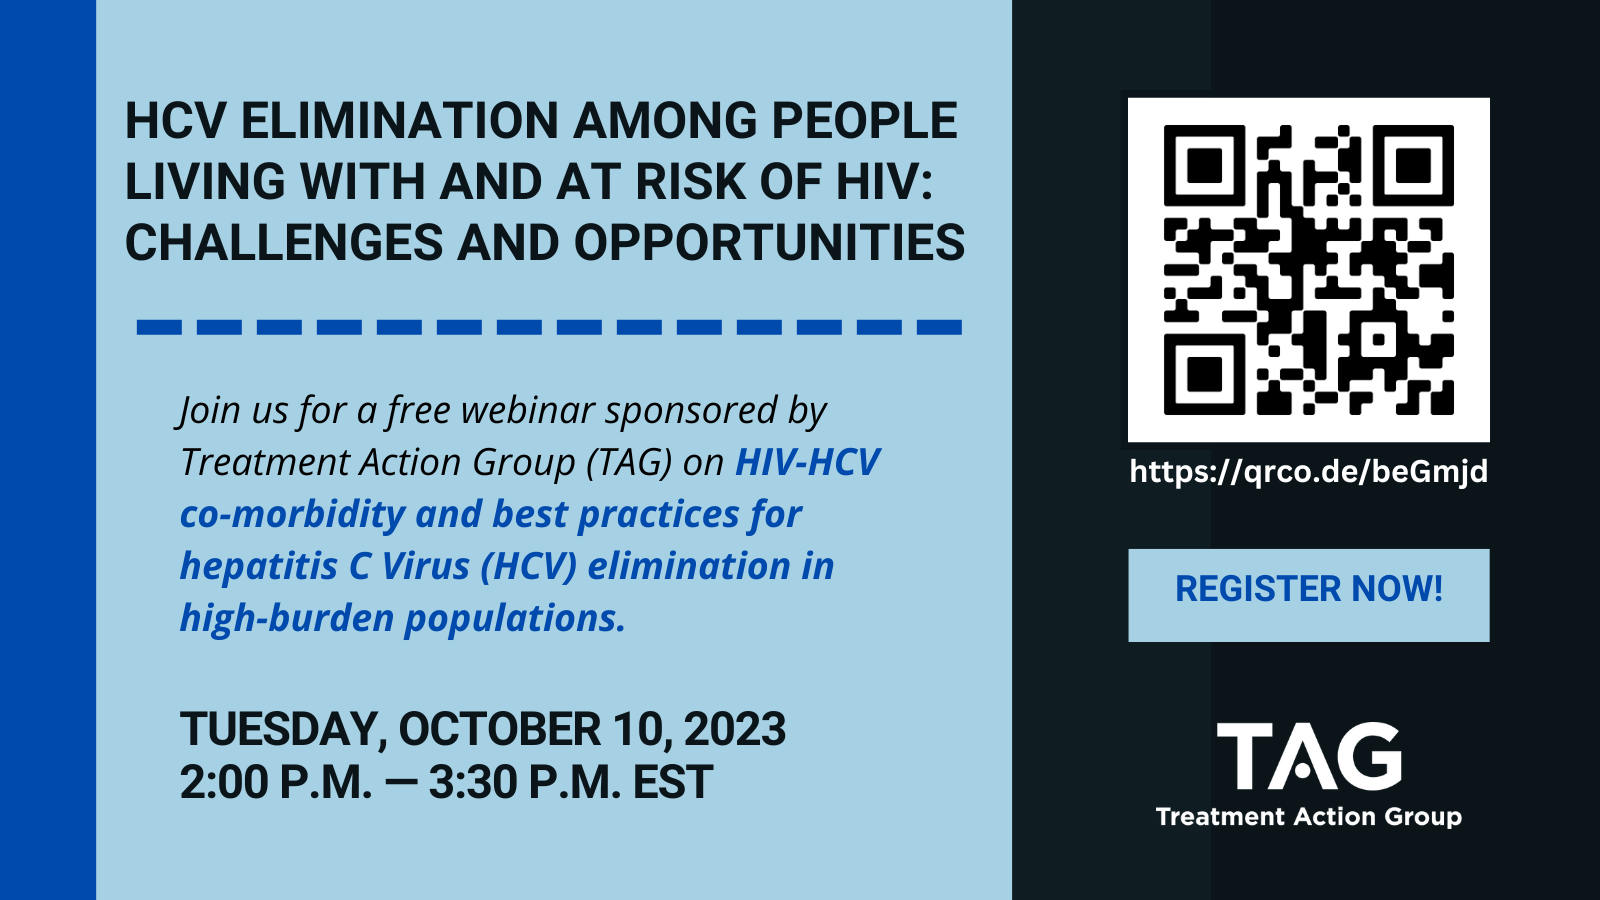 Image for webinar: HCV Elimination Among People Living with and at Risk of HIV: Challenges and opportunities